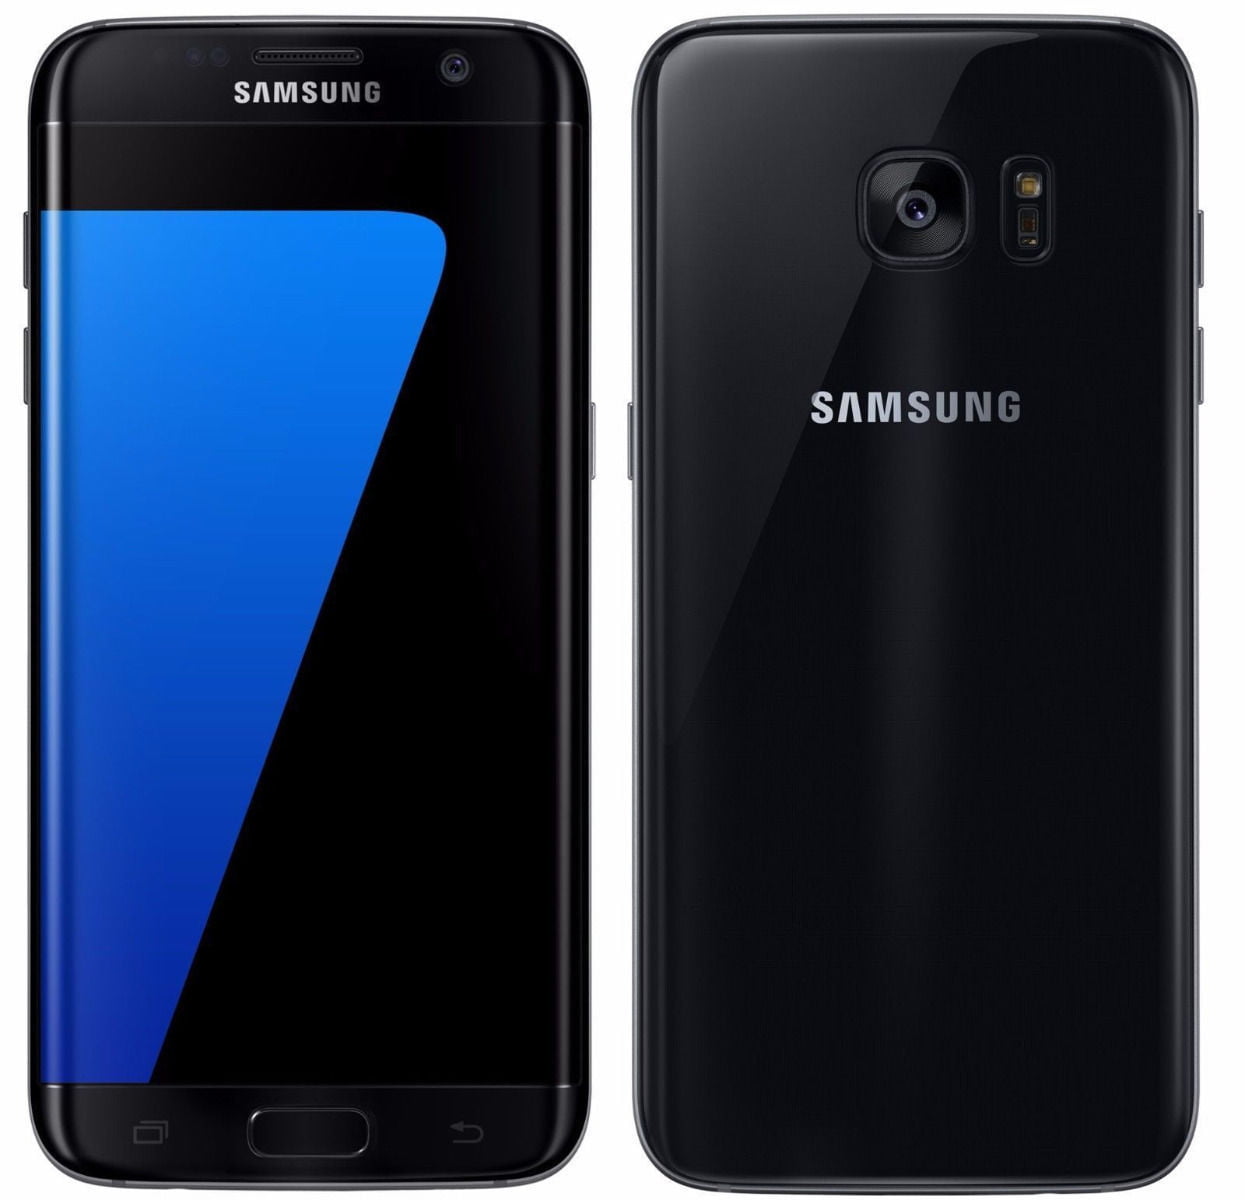 Refurbished Like New  Samsung Galaxy S7 Edge 32GB SM-G935T Unlocked GSM 4G LTE Android Smartphone